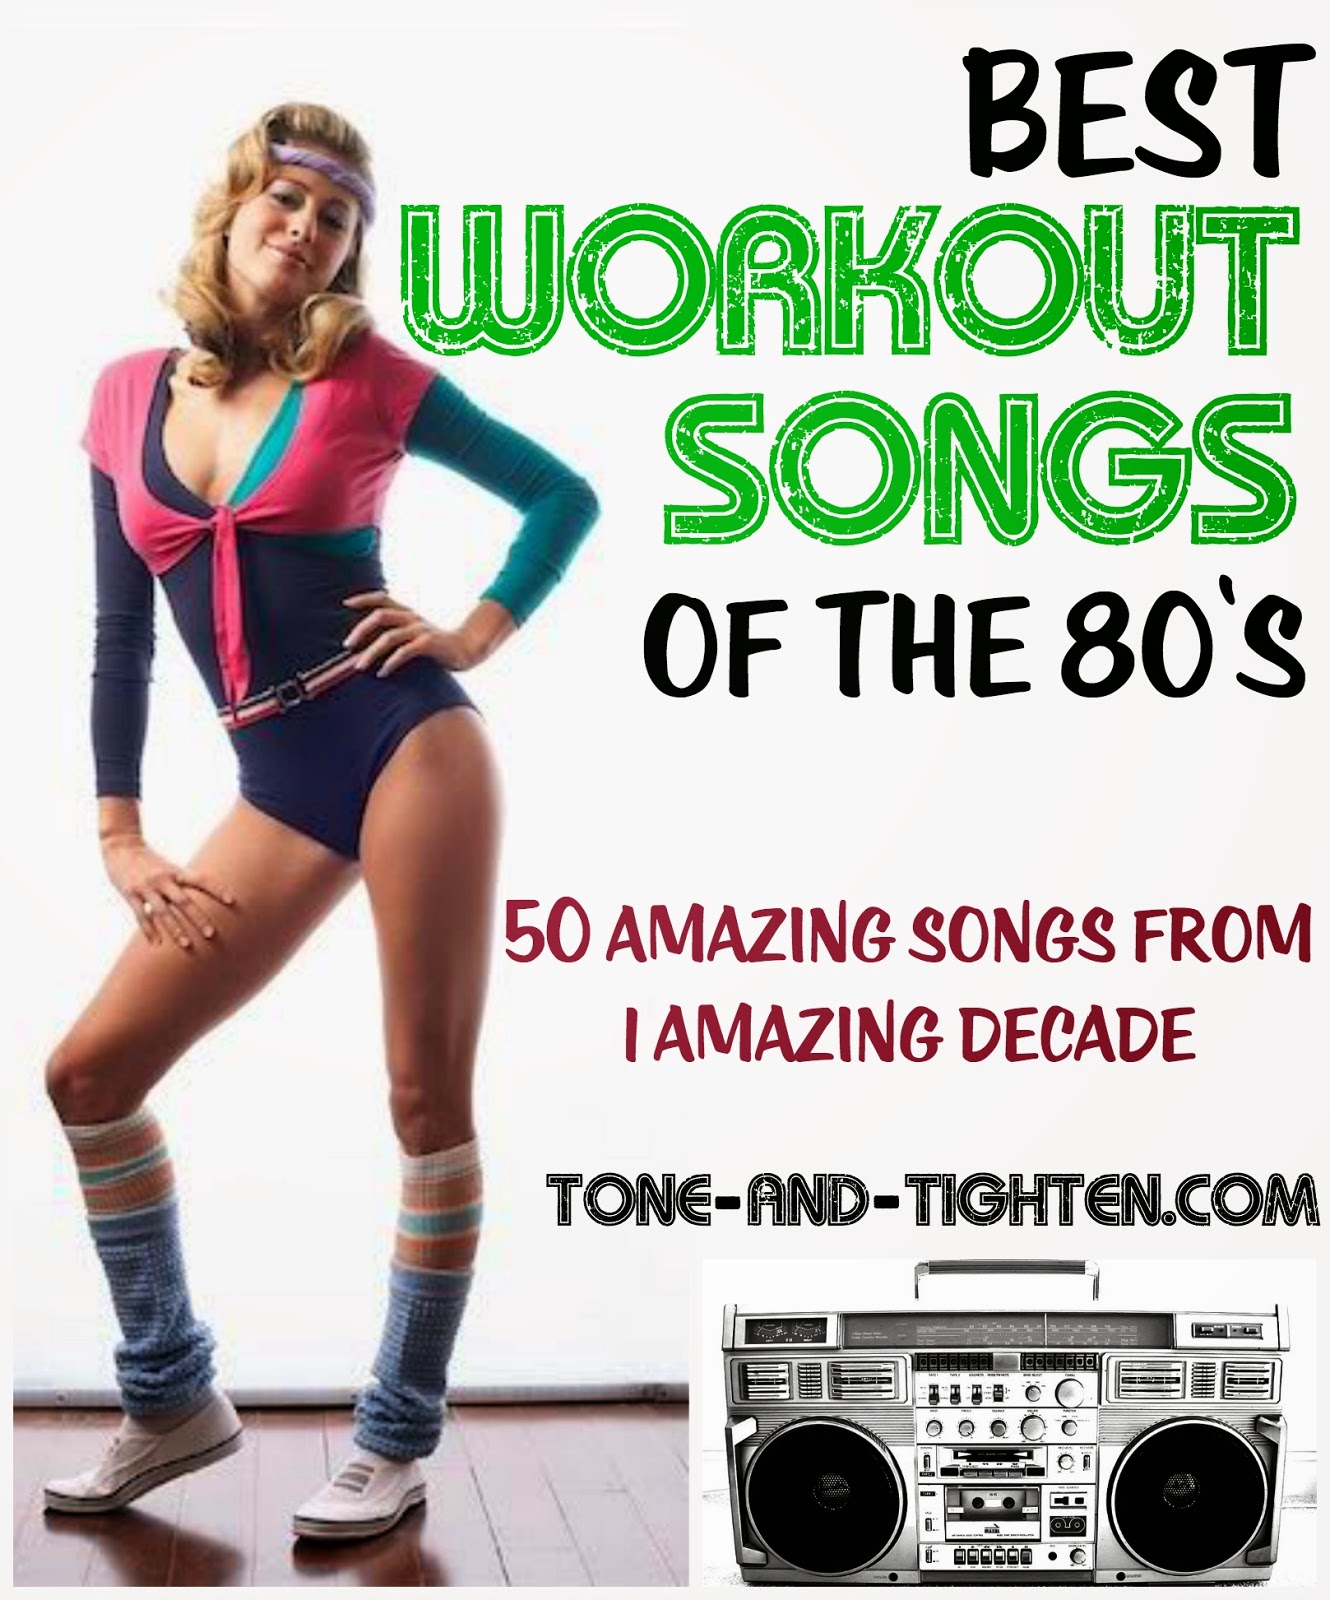 50 of the greatest workout songs from the 1980's! Eighties workout playlist from Tone-and-Tighten.com